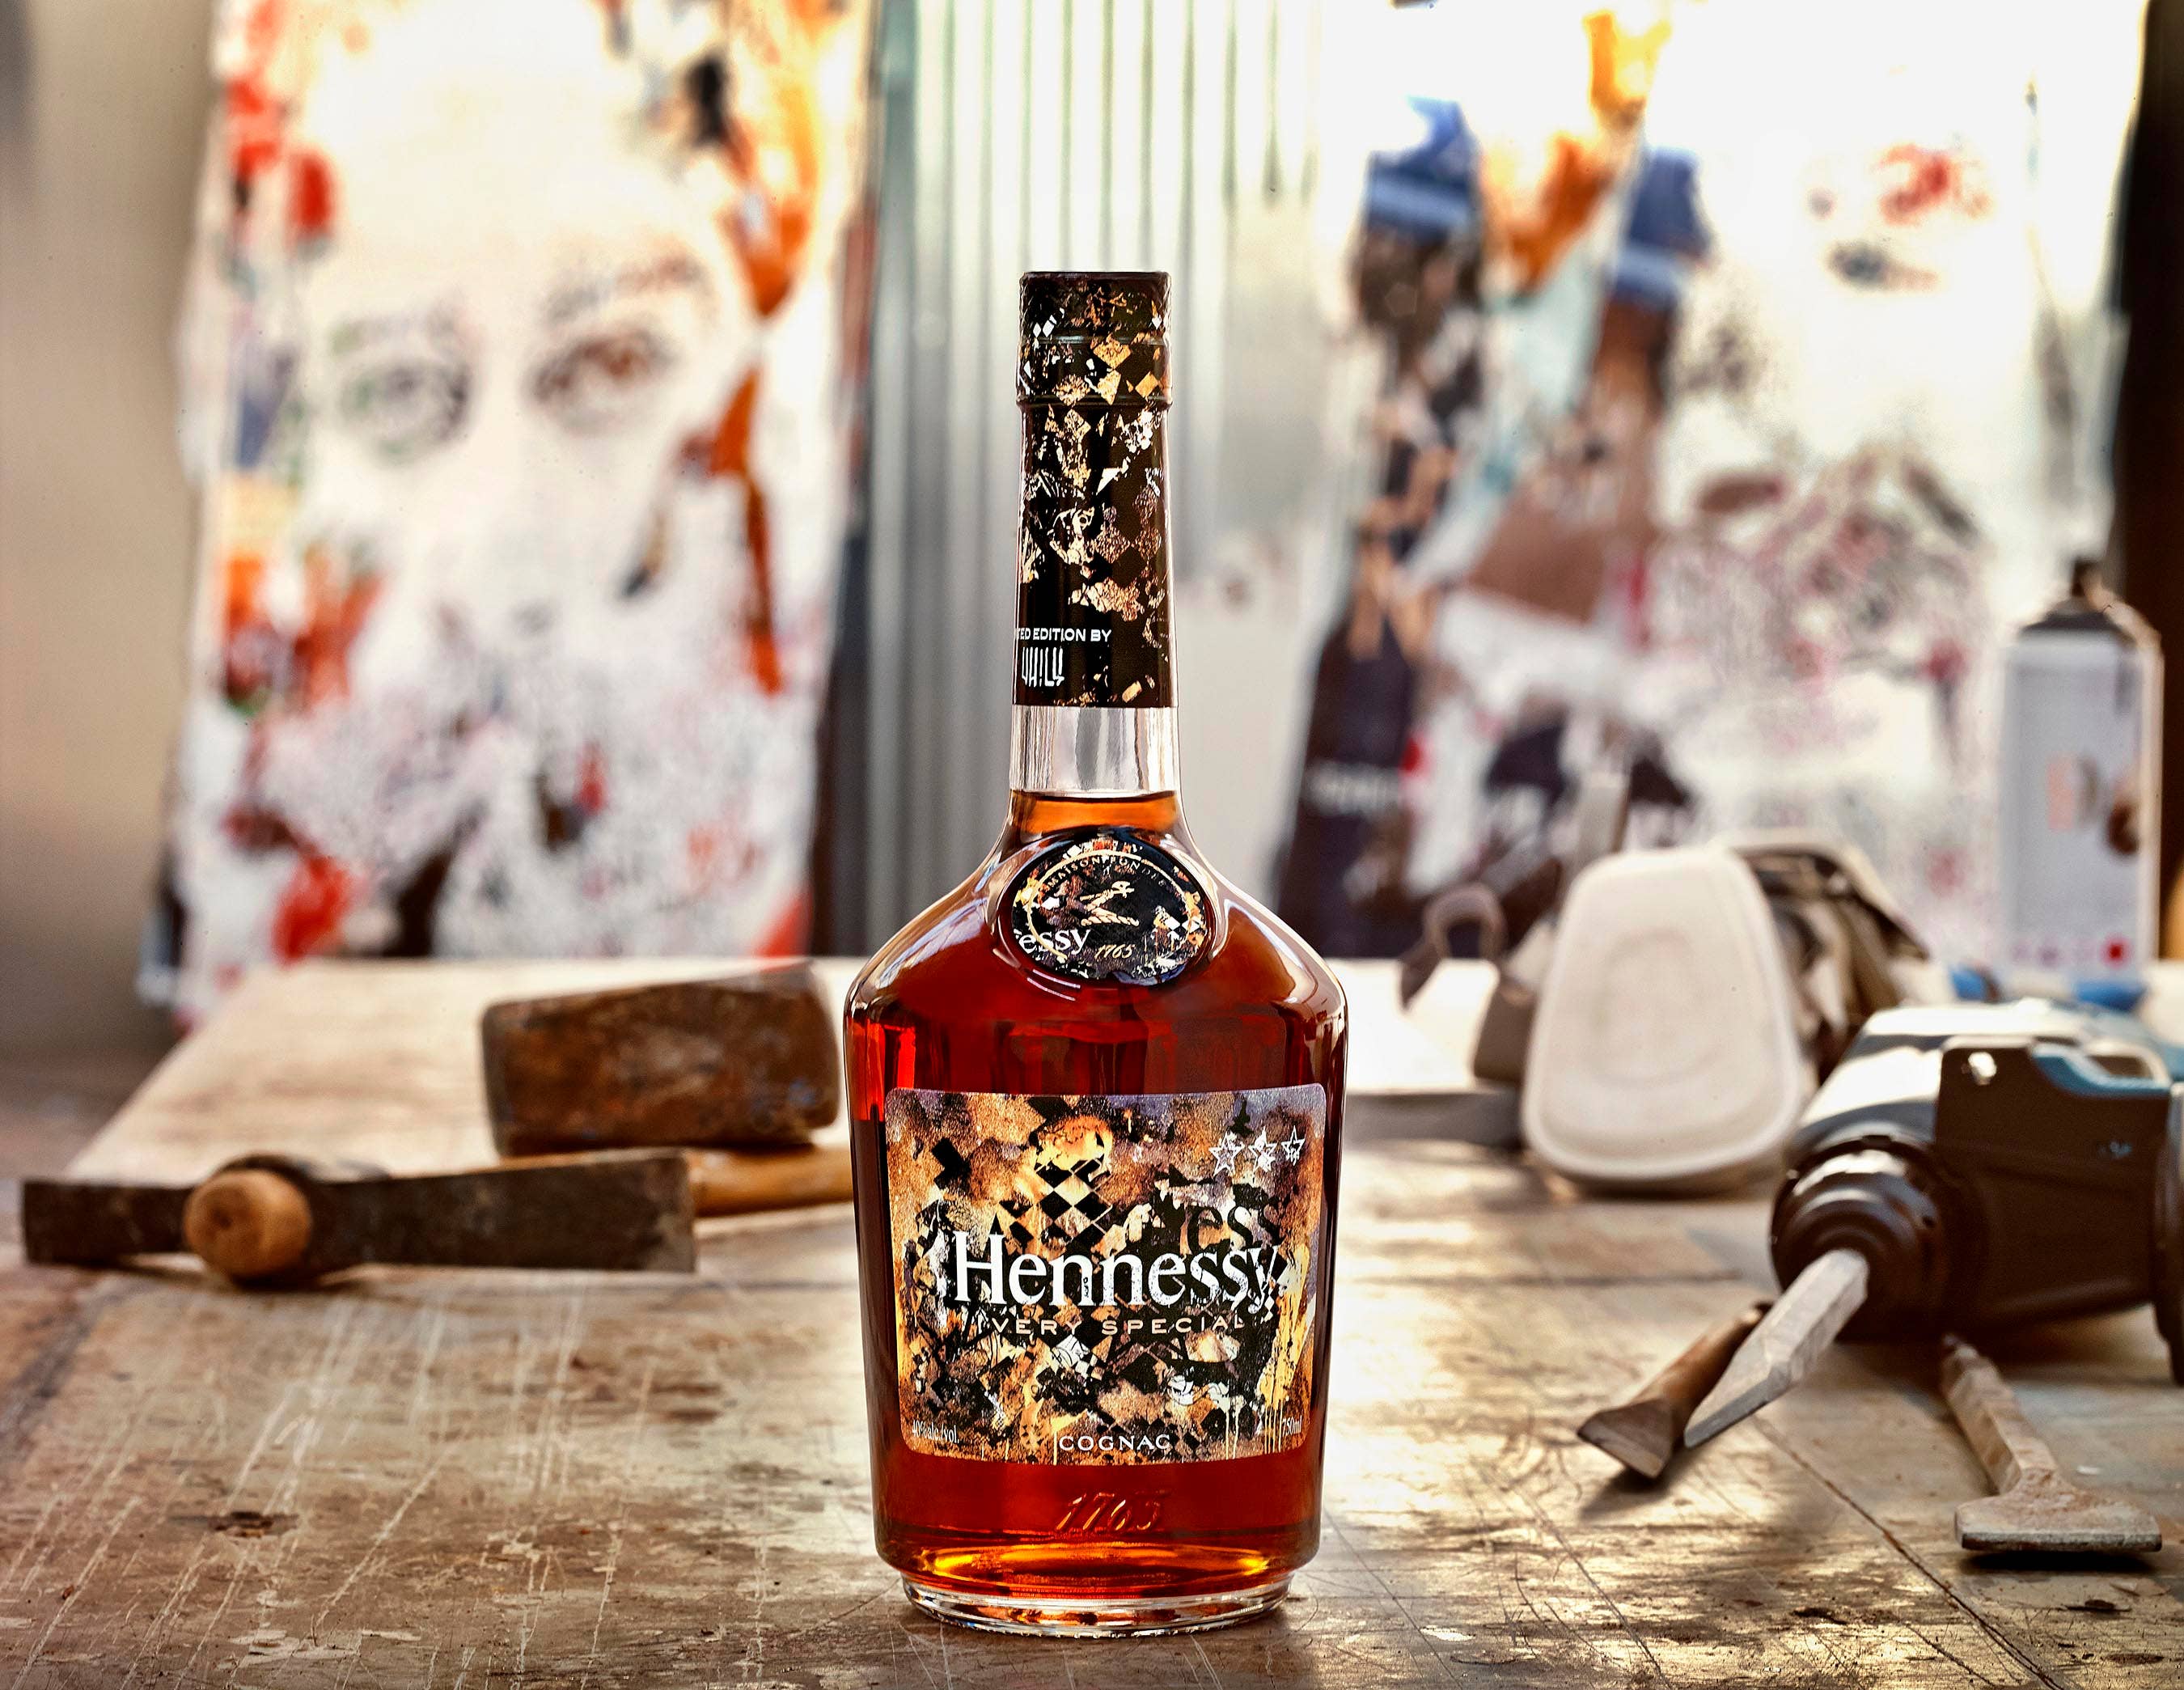 BUY] Hennessy V.S. JonOne Limited Edition Cognac at